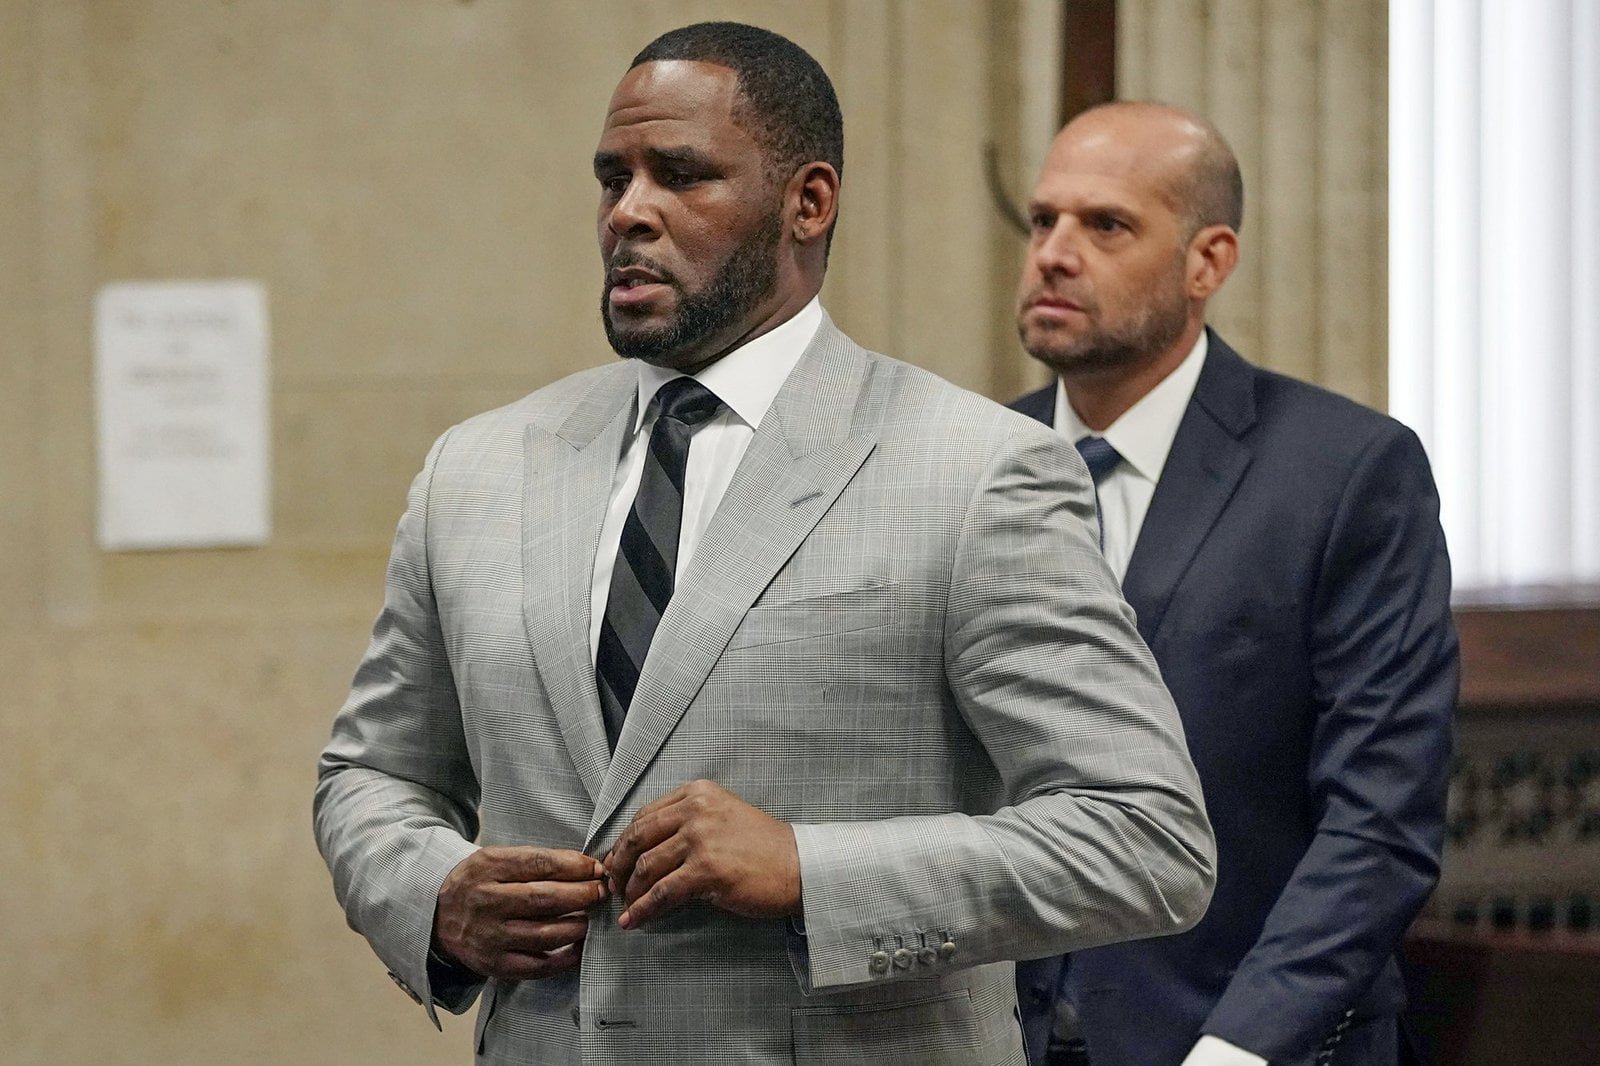 Feds-scoff-at-R-Kelly’s-Claim-That-he-was-Placed-on-Suicide-Watch-as-Punishment